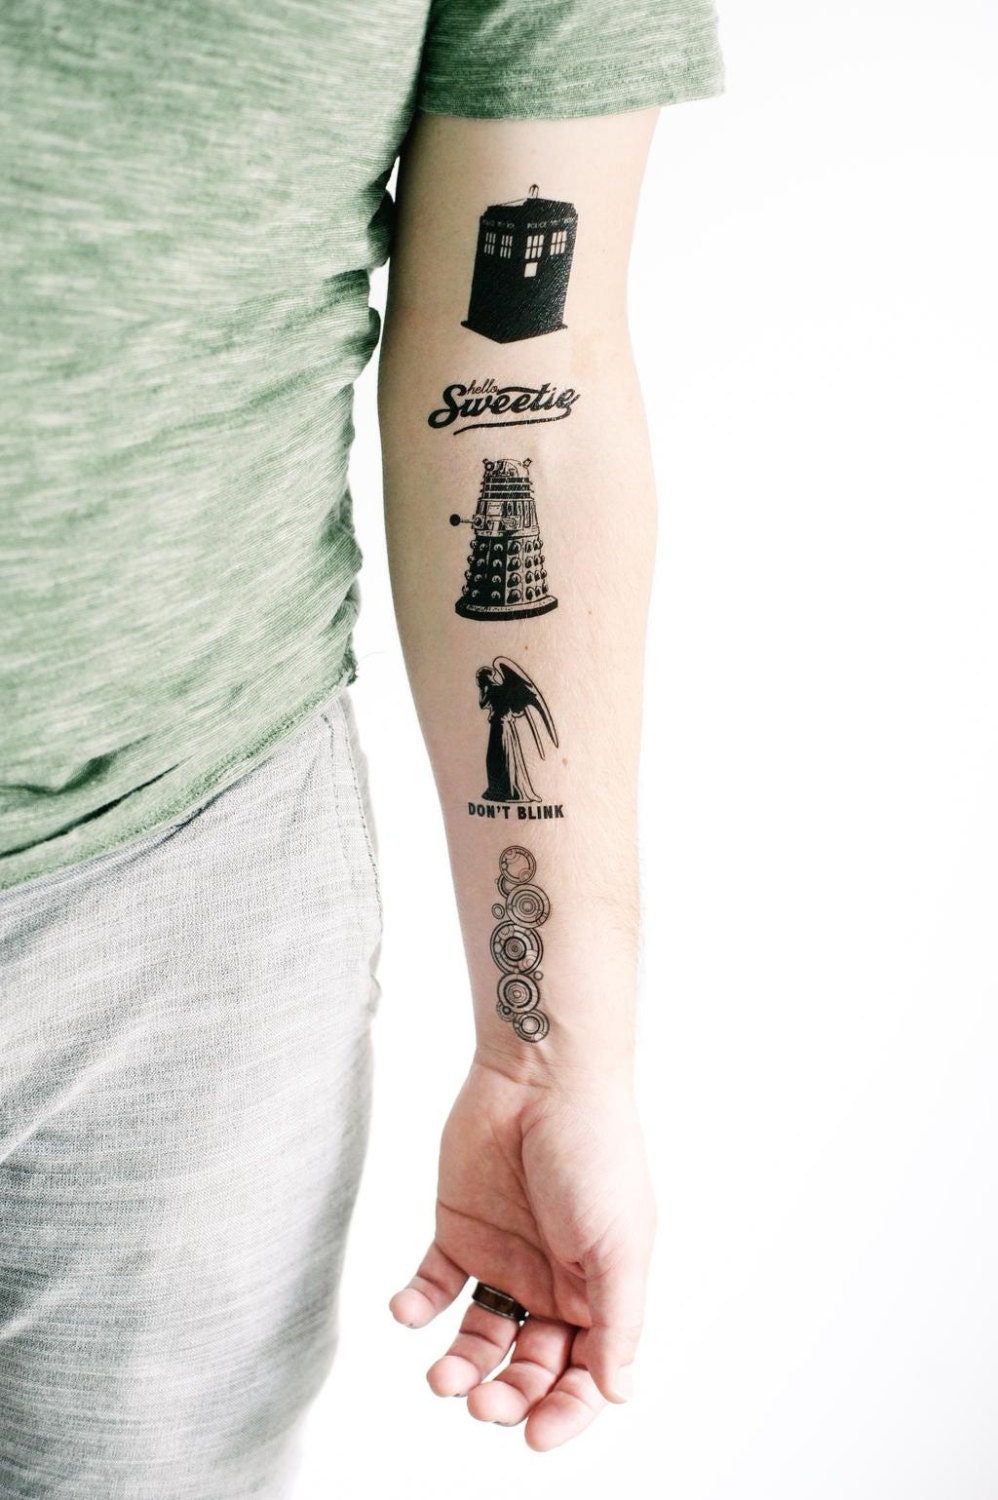 Doctor who temporary tattoos